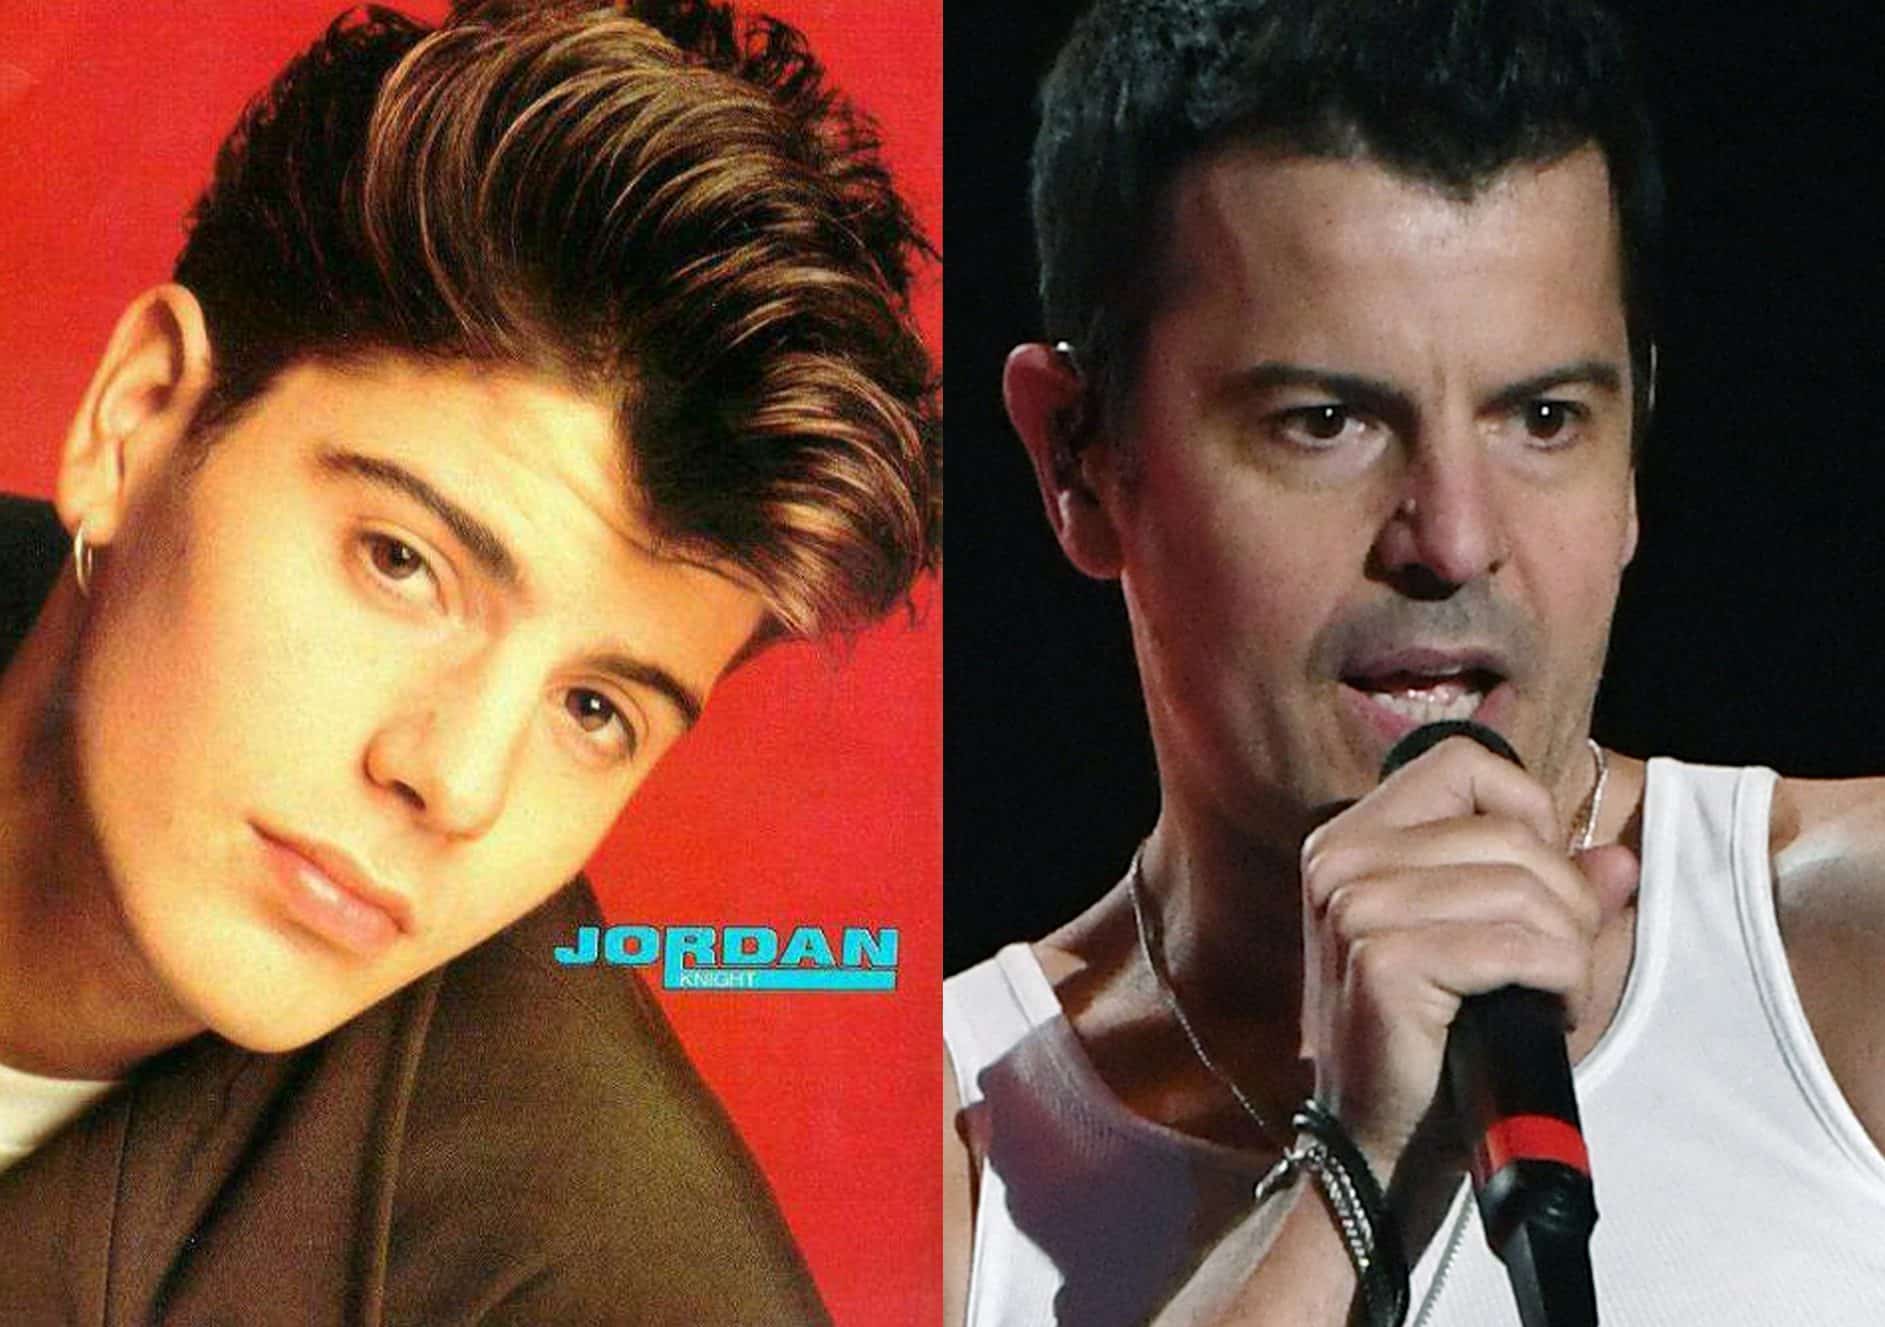 tung Kør væk pære Remember New Kids On The Block? This Is What They're Up To Now!